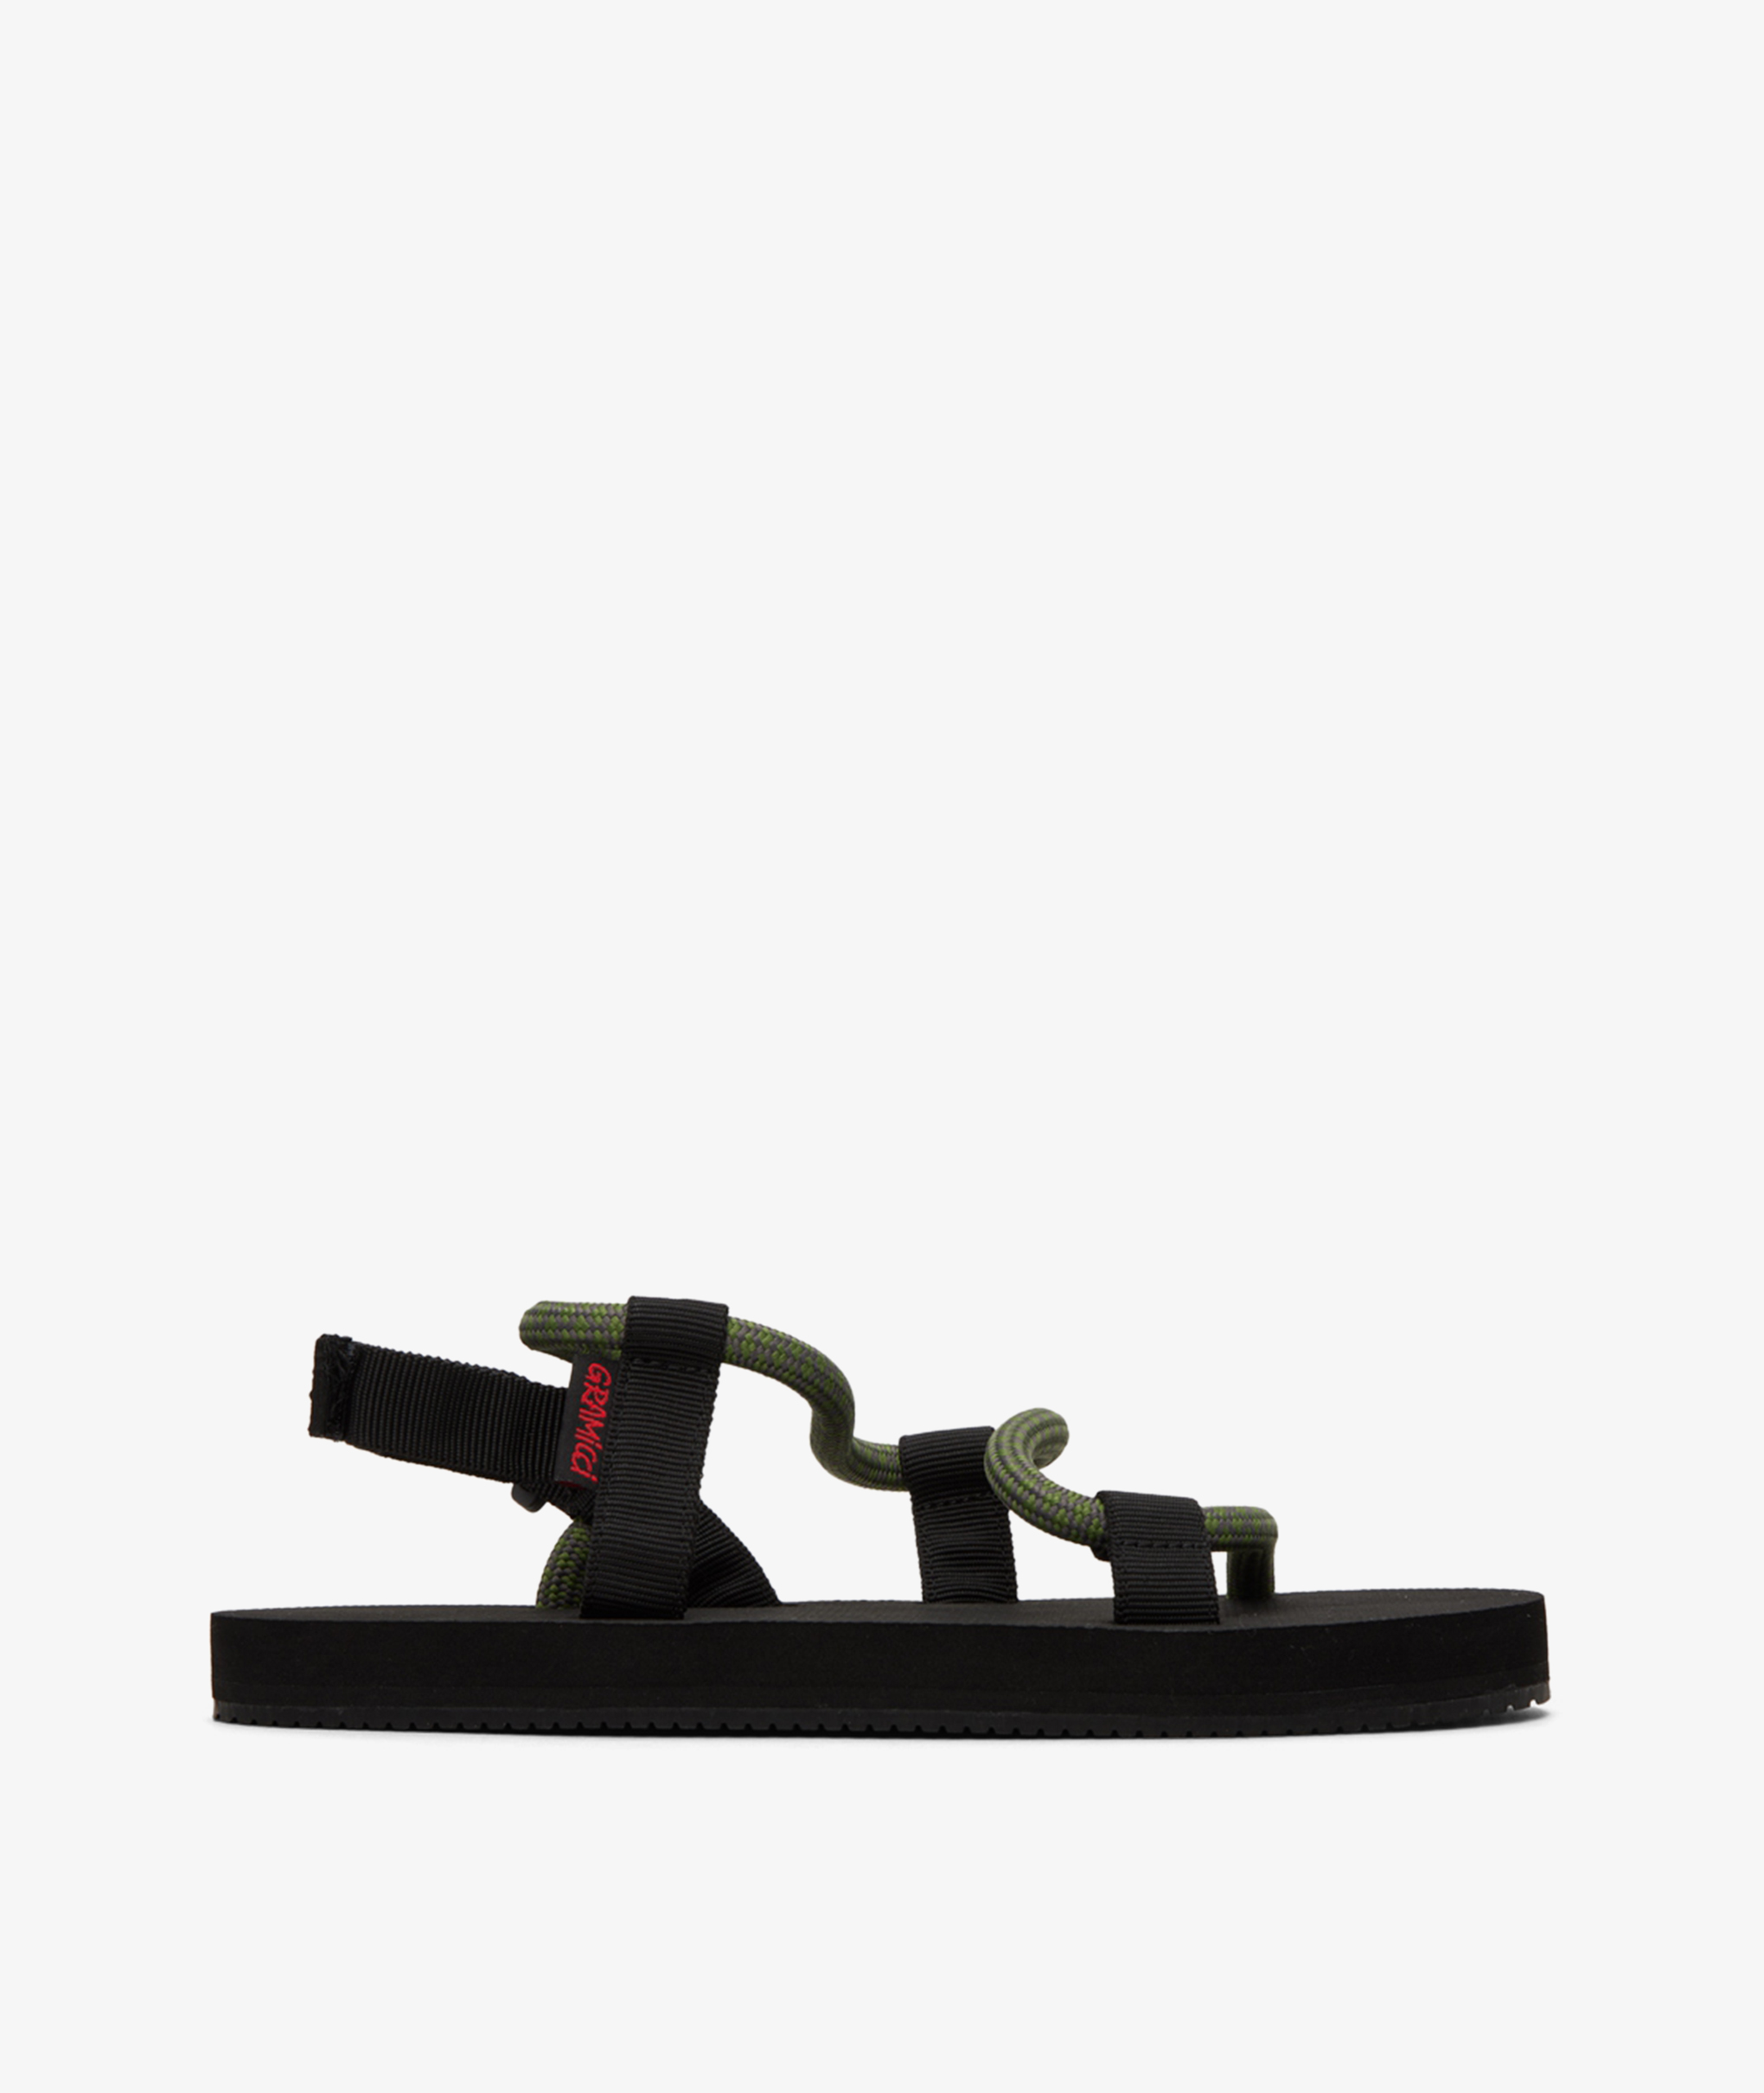 Norse Store | Shipping Worldwide - Gramicci Rope Sandals - Olive